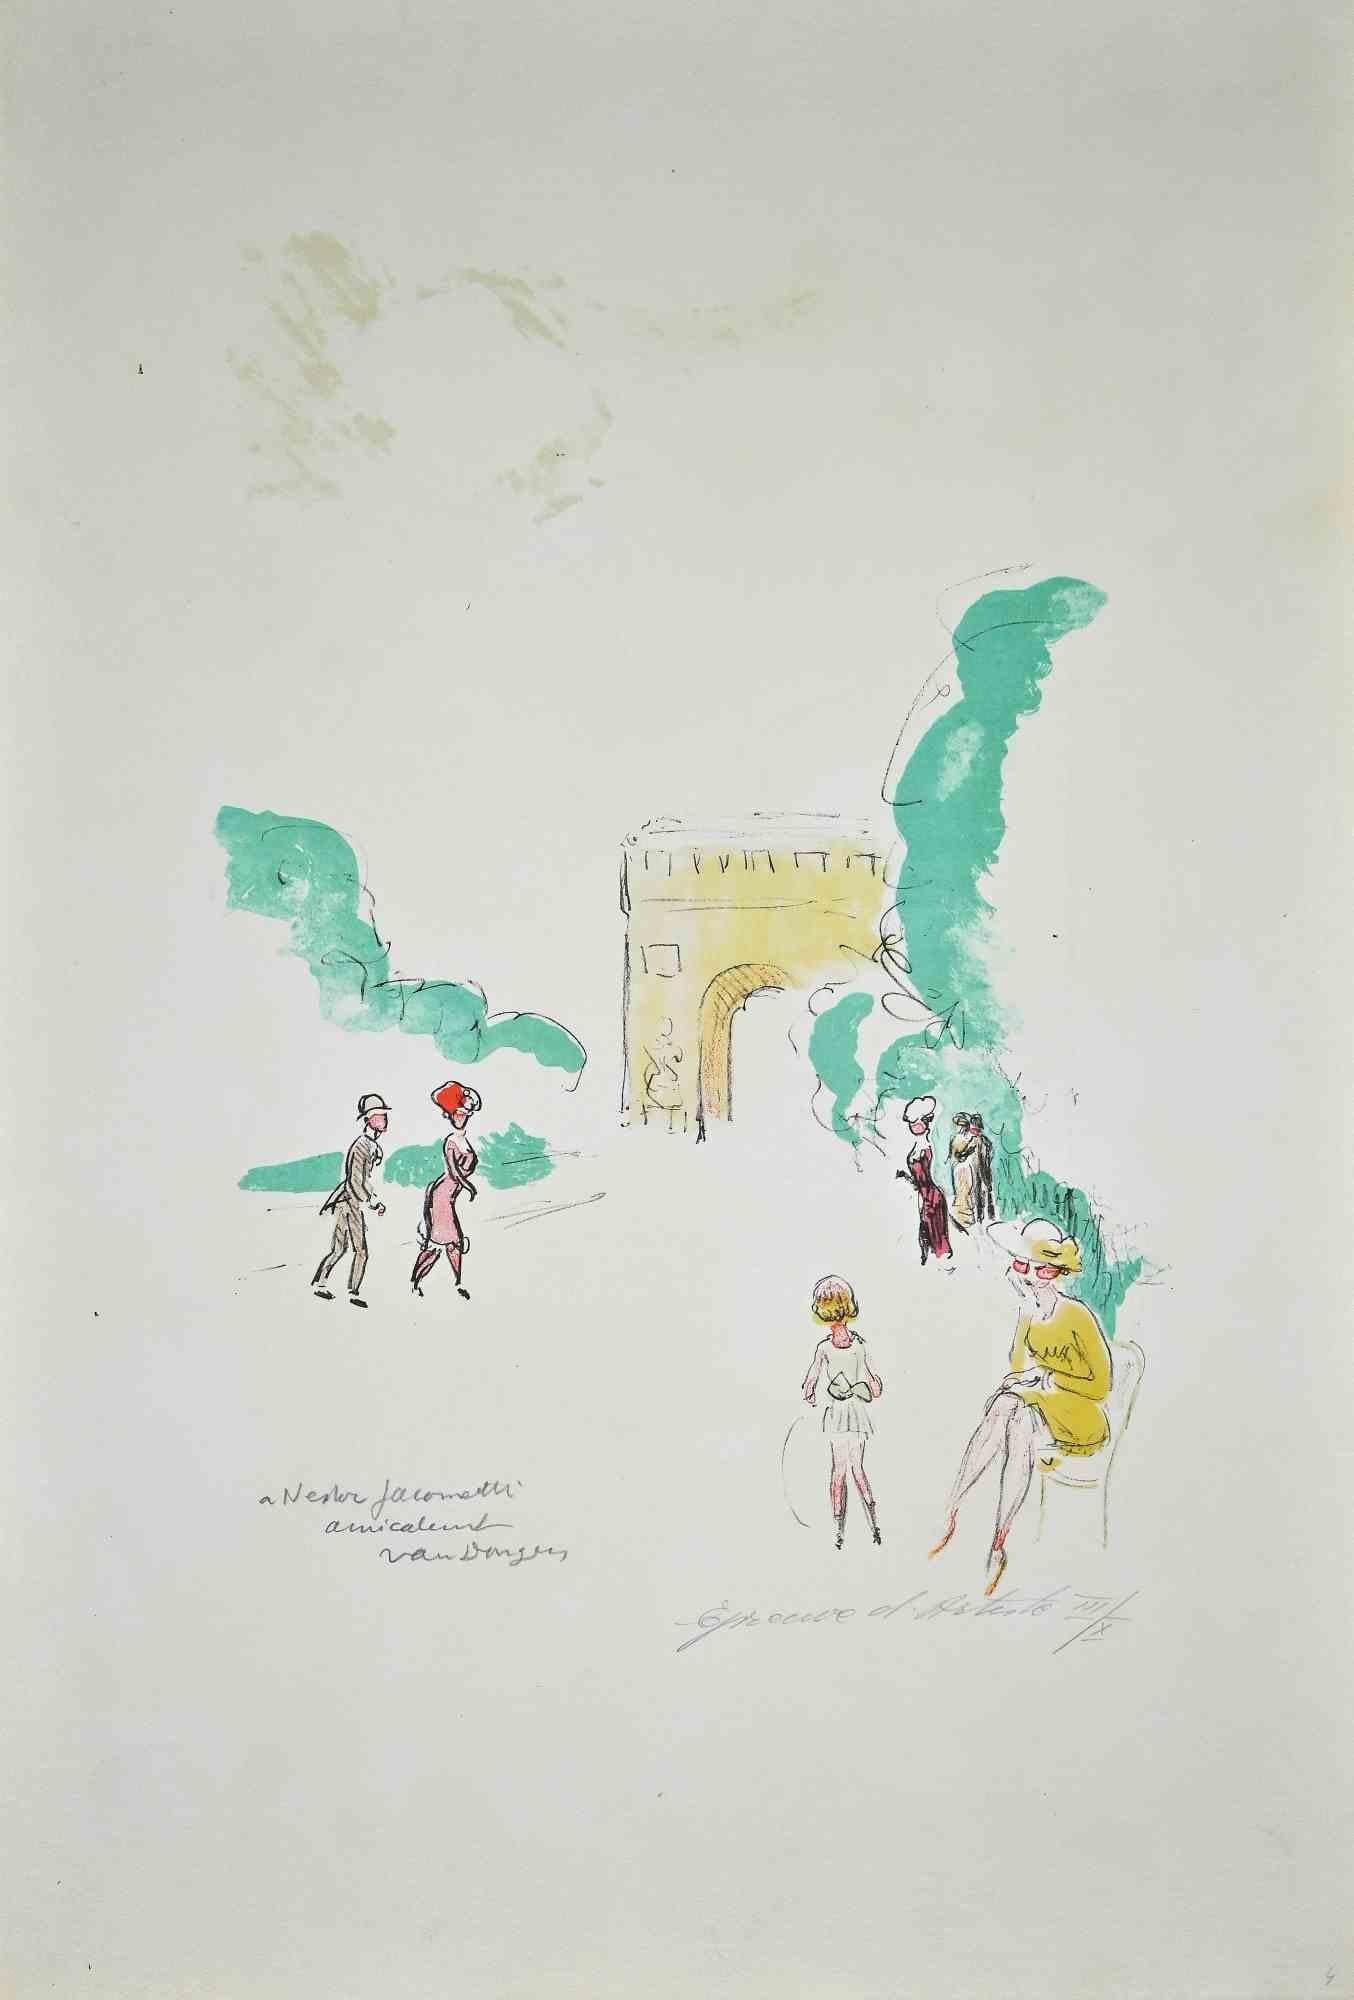 Untitled is an original Modern artwork realized by Cornelis Theodorus Maria 'Kees' van Dongen (26 January 1877 – 28 May 1968).

Hand signed and numbered by artist with pencil, with dedication to Nesto Jacometti.

Edition of 10 prints in Roman